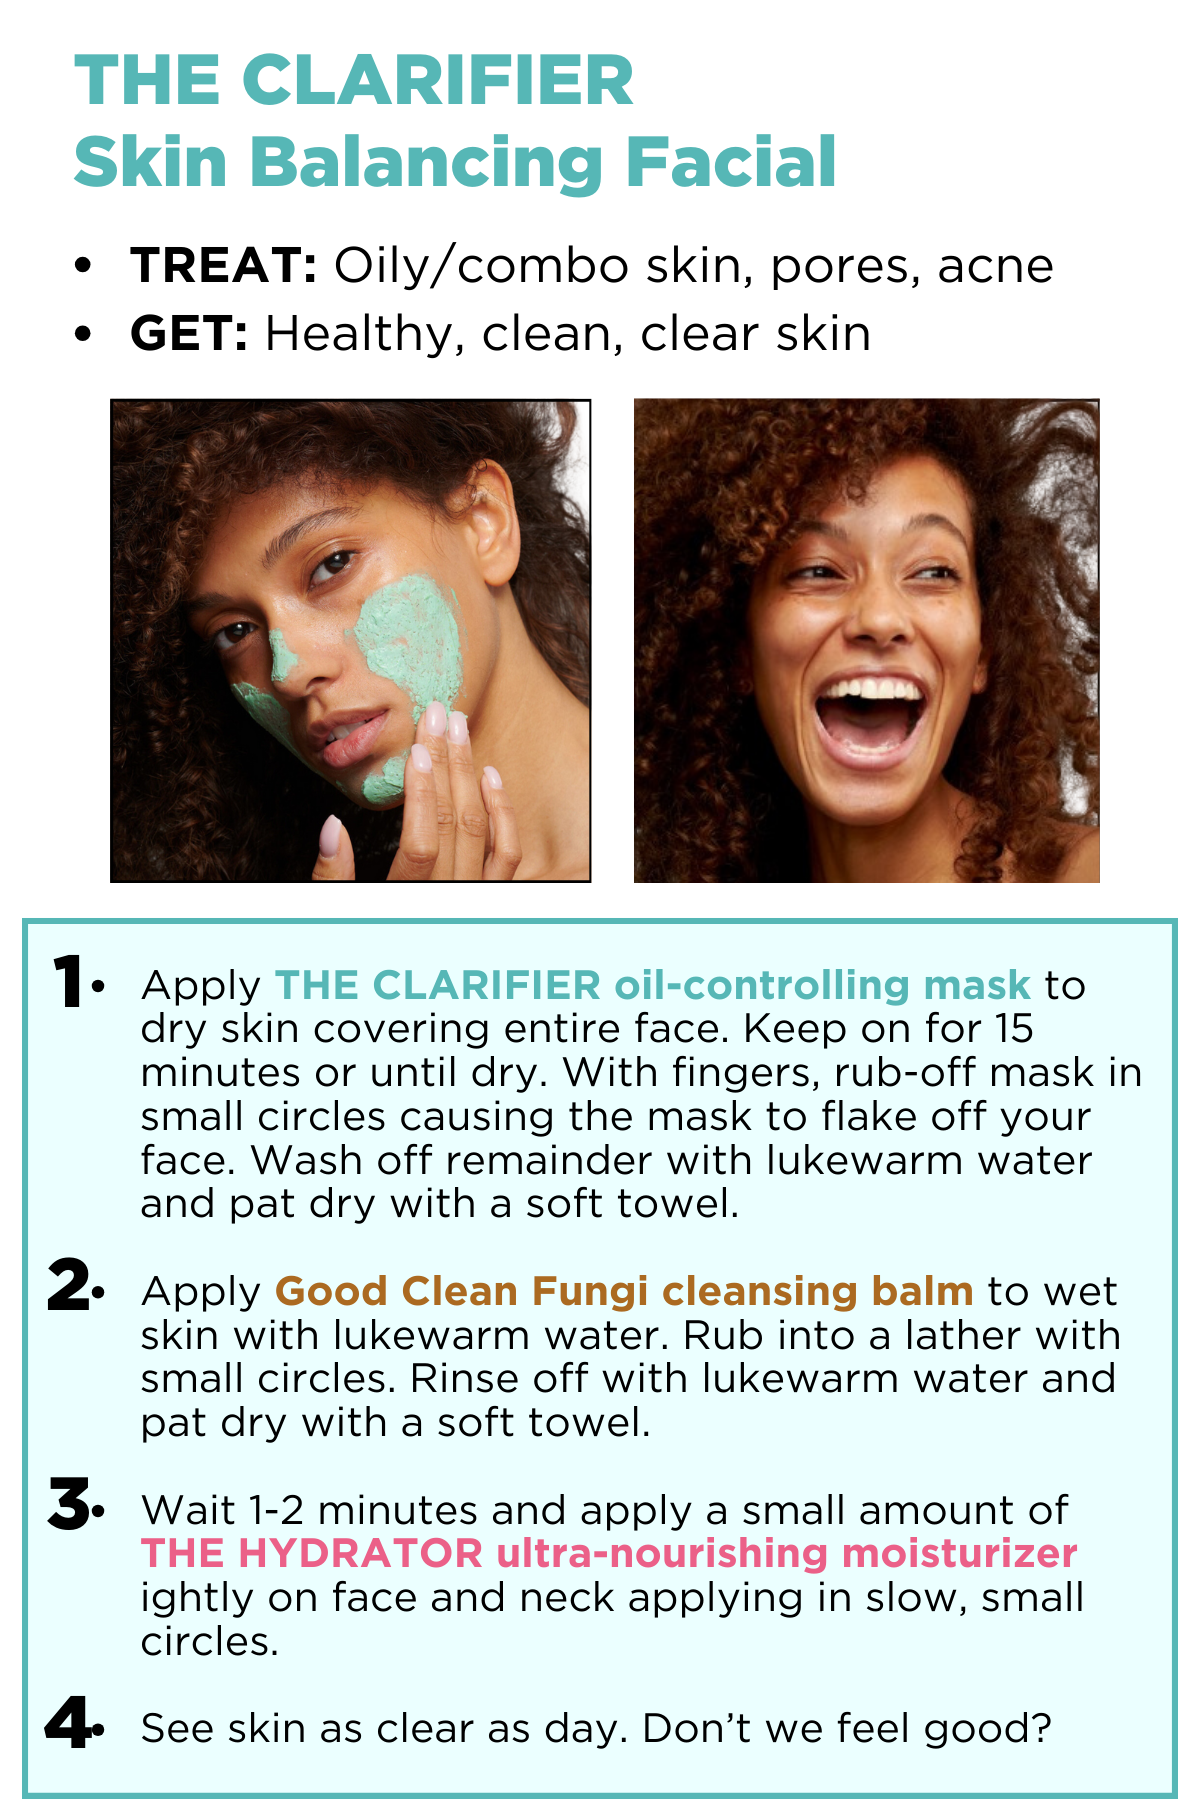 The steps for doing The Clarifier Skin Balancing Facial